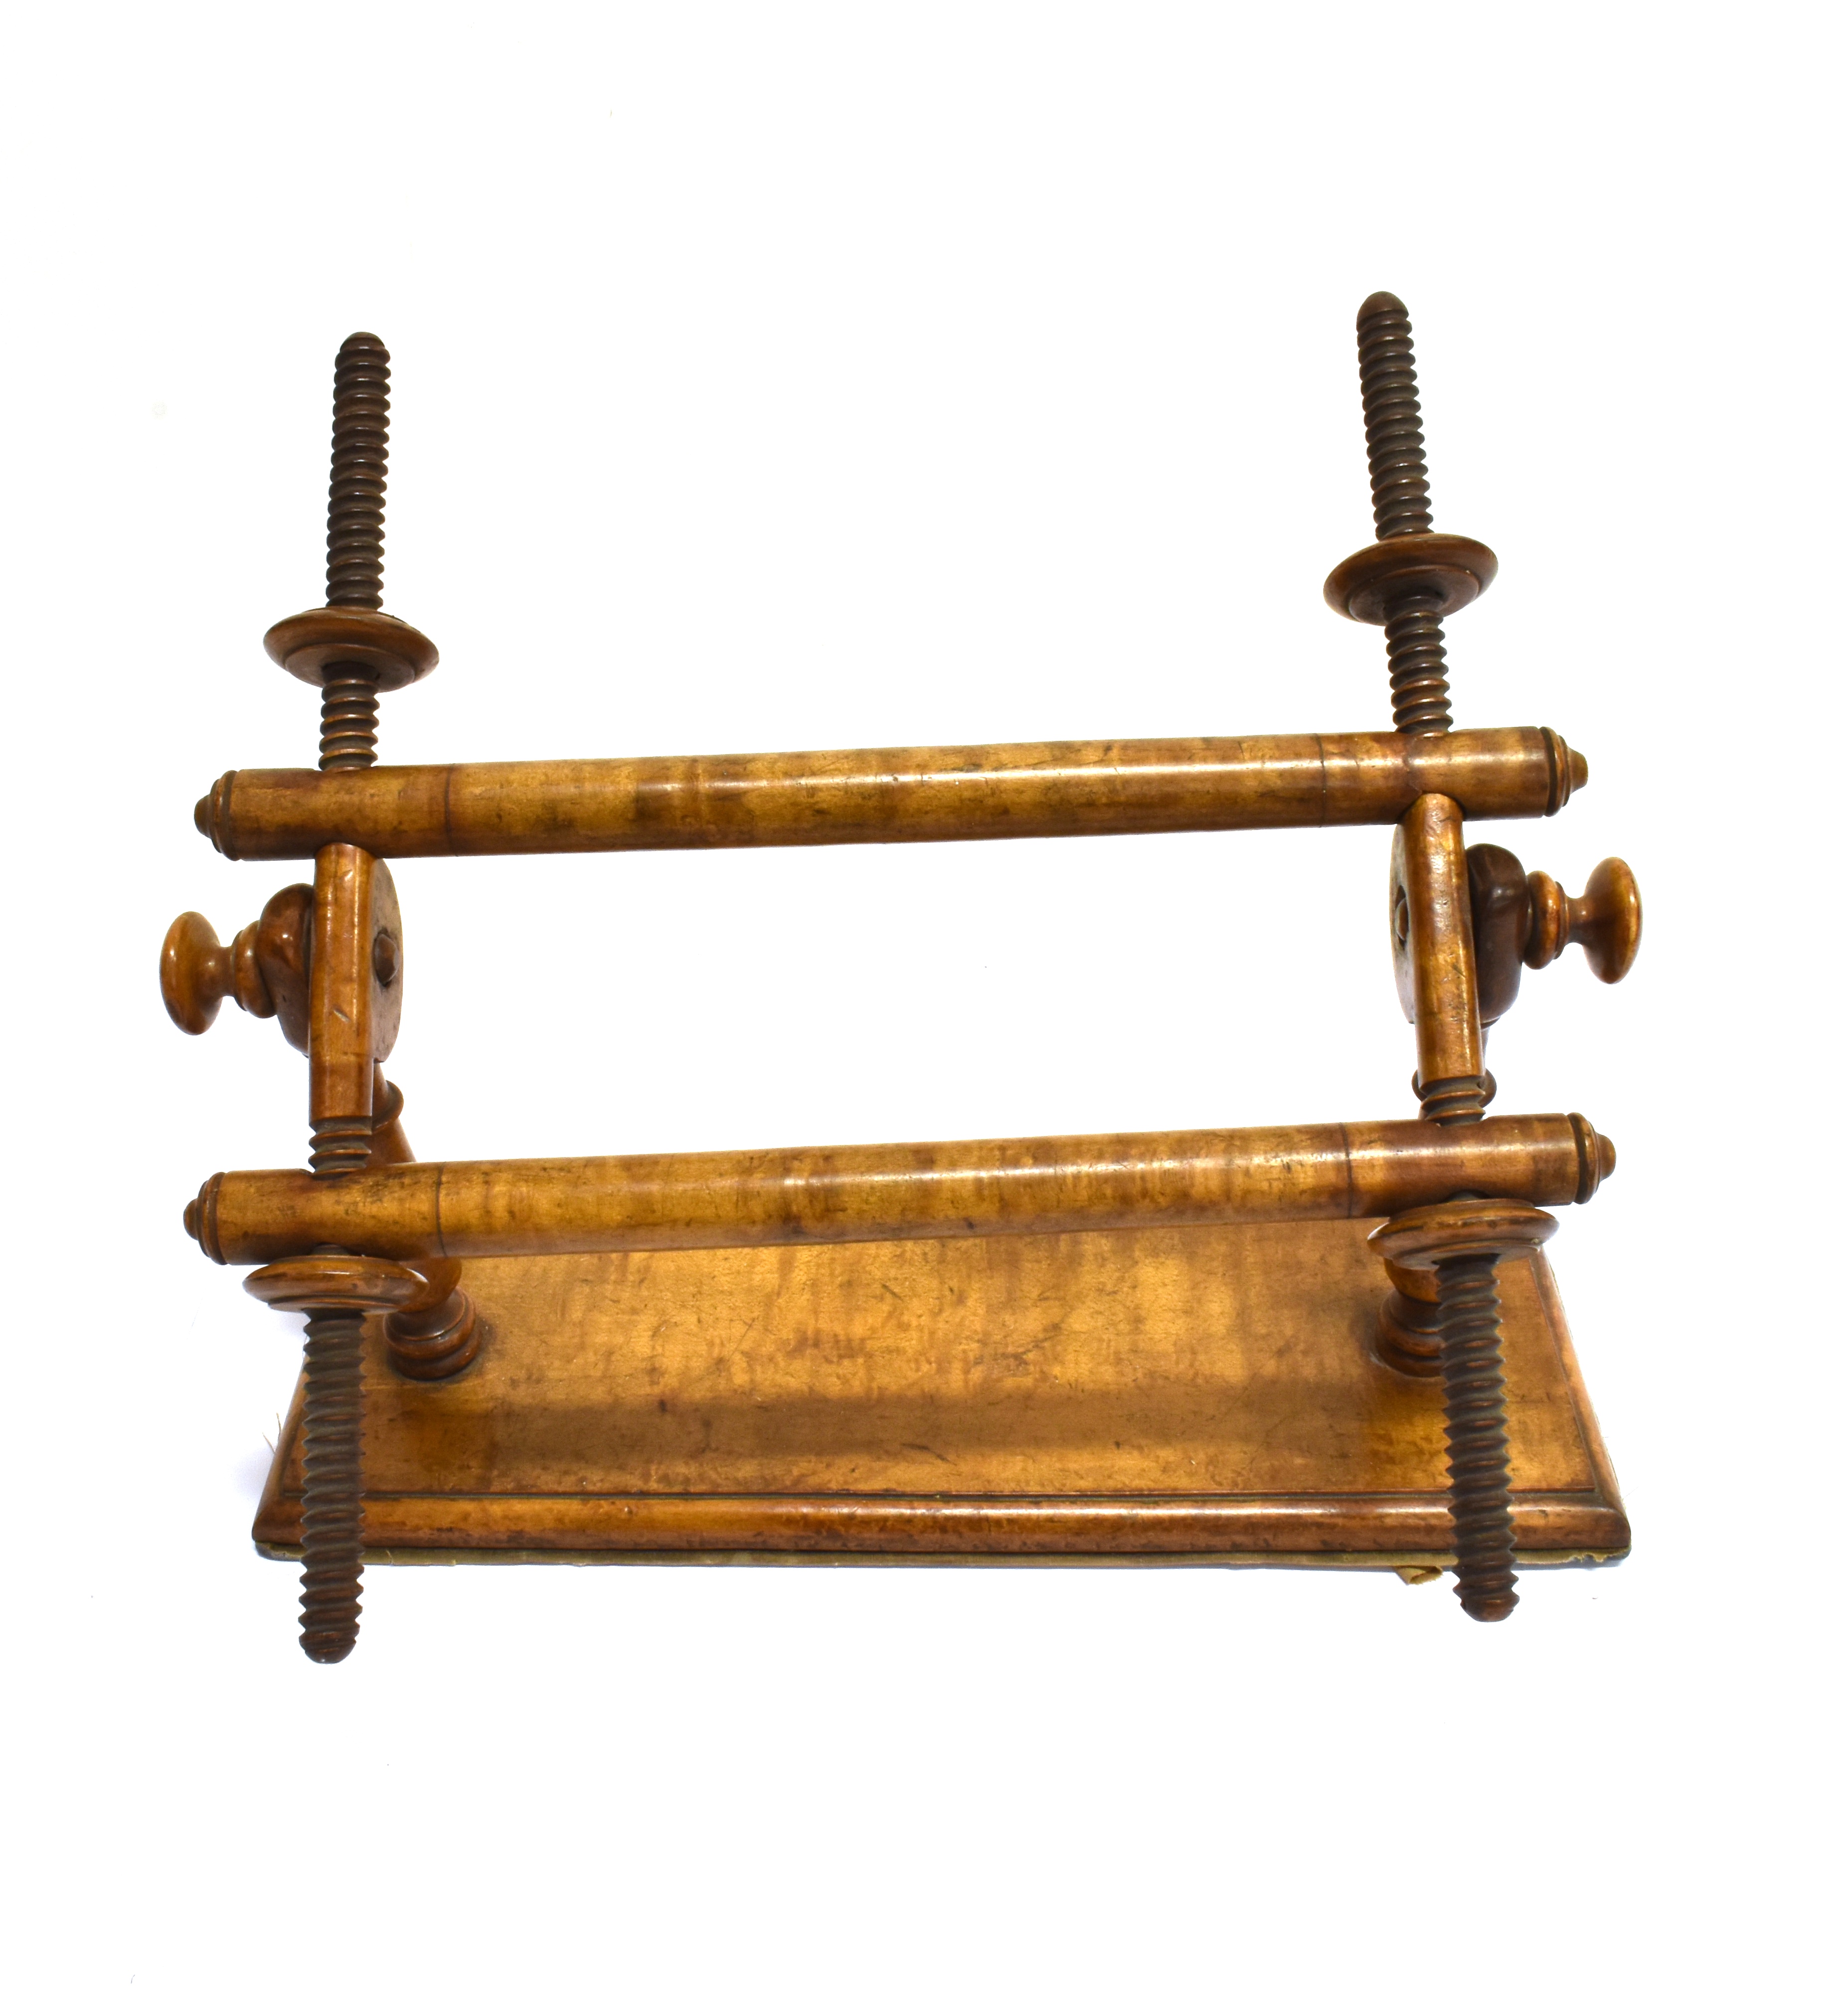 A LATE 18TH OR EARLY 19TH CENTURY EMBROIDERY TABLE STAND of turned wooden construction, on a